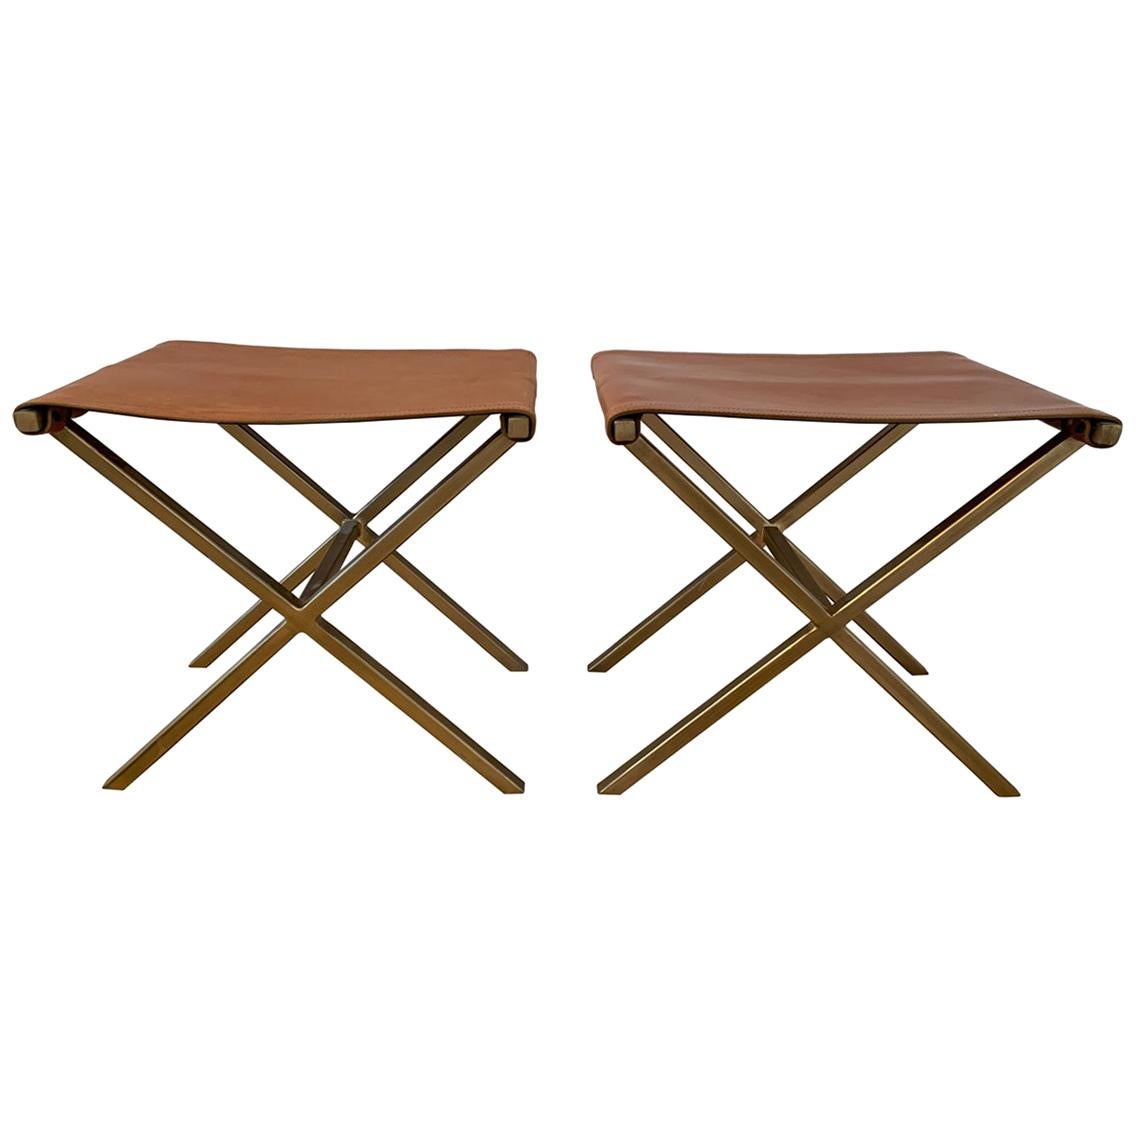 Pair of X Frame Benches in Leather and Gold Tone Metal